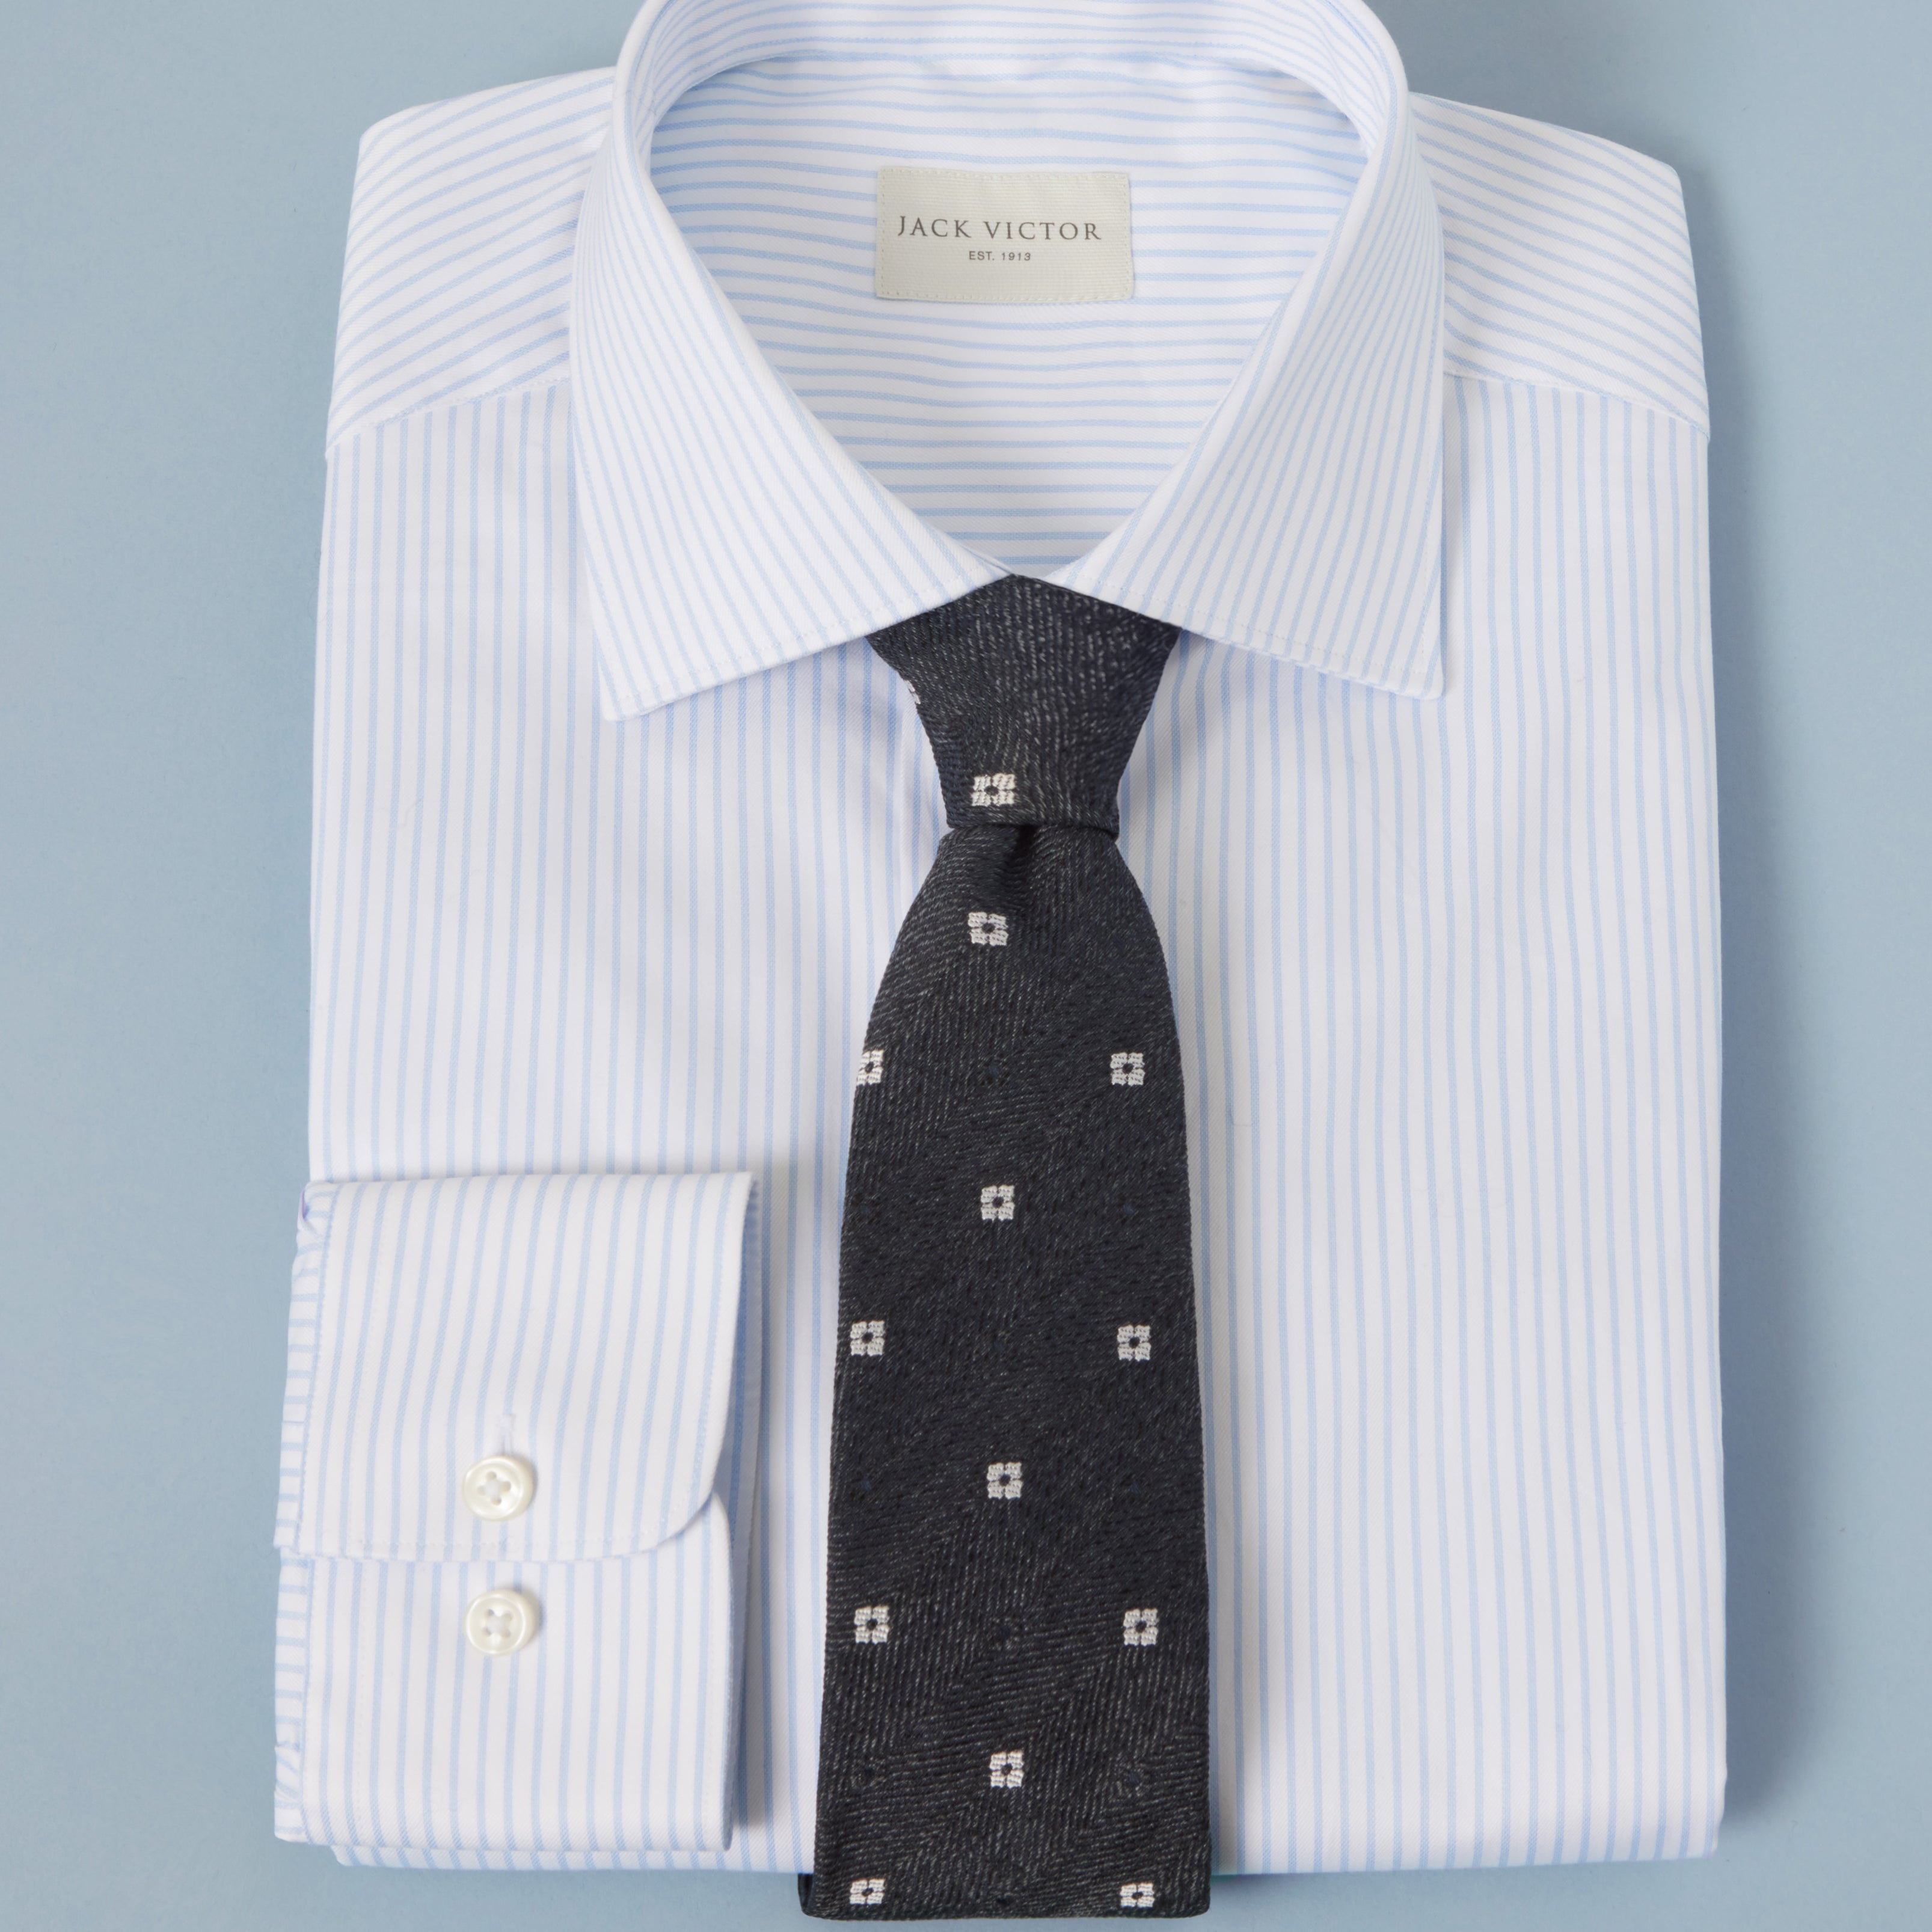 white pinstripe shirt folded with black tie